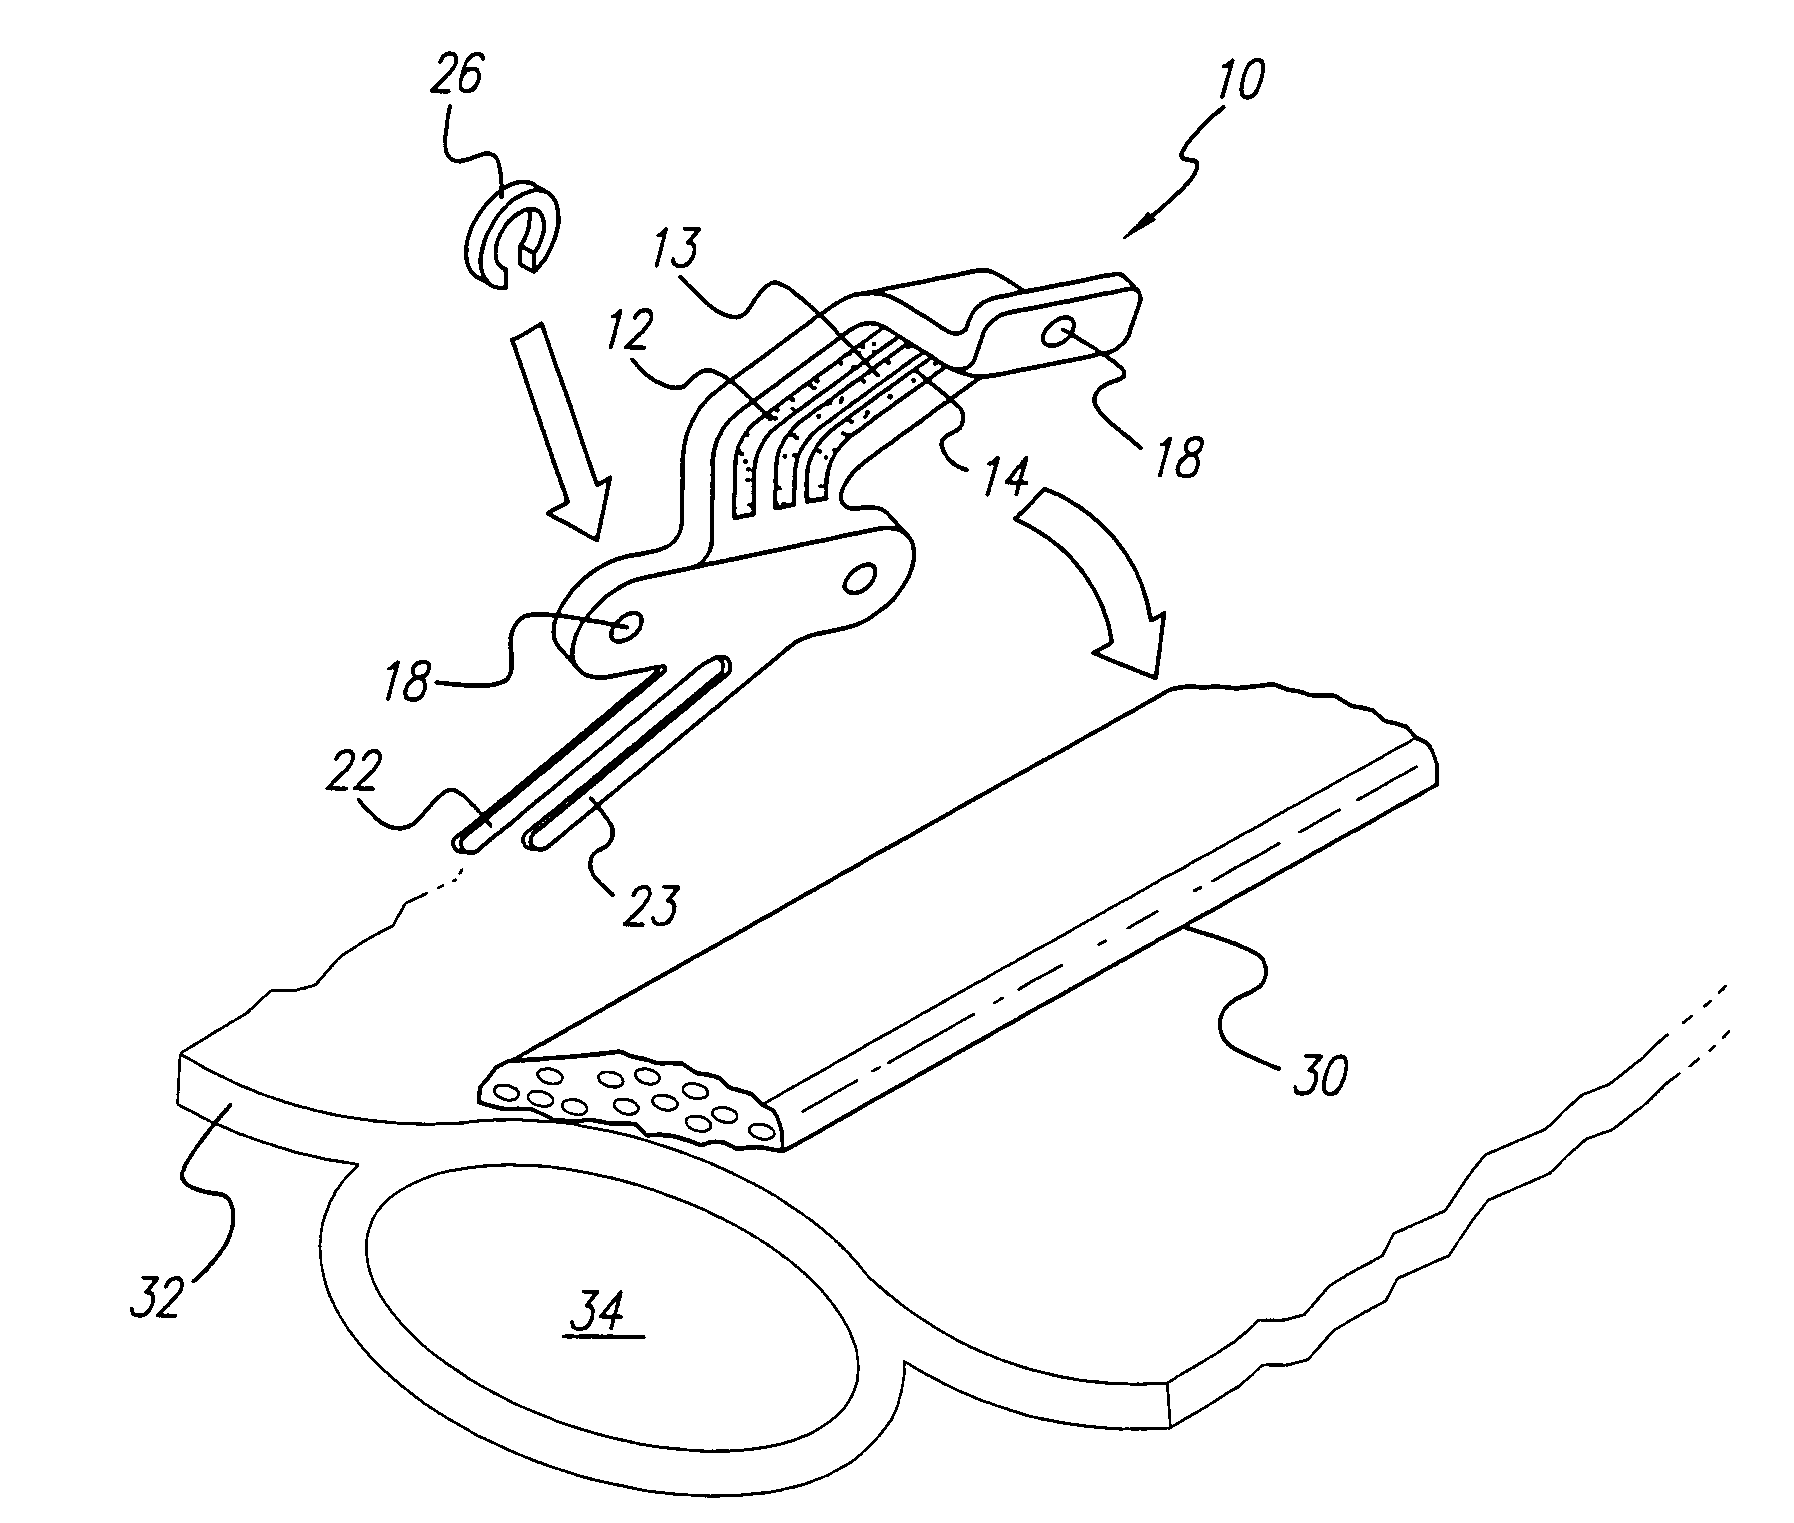 Curved paddle electrode for use with a neurostimulator